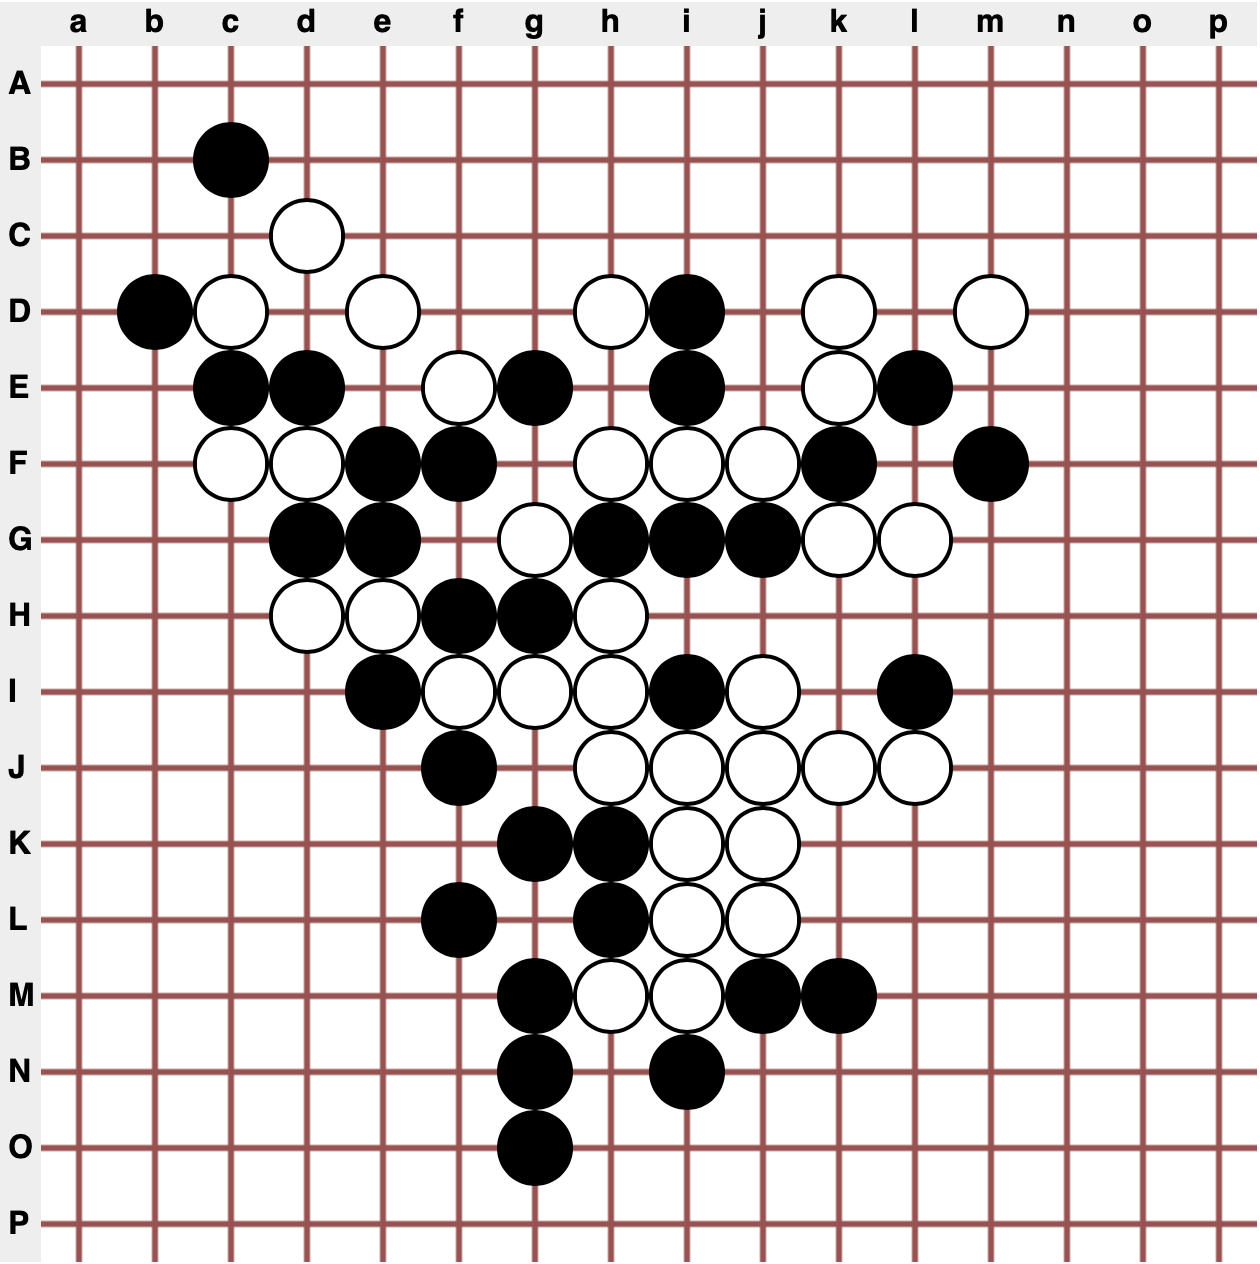 Final position in a game of Gomoku